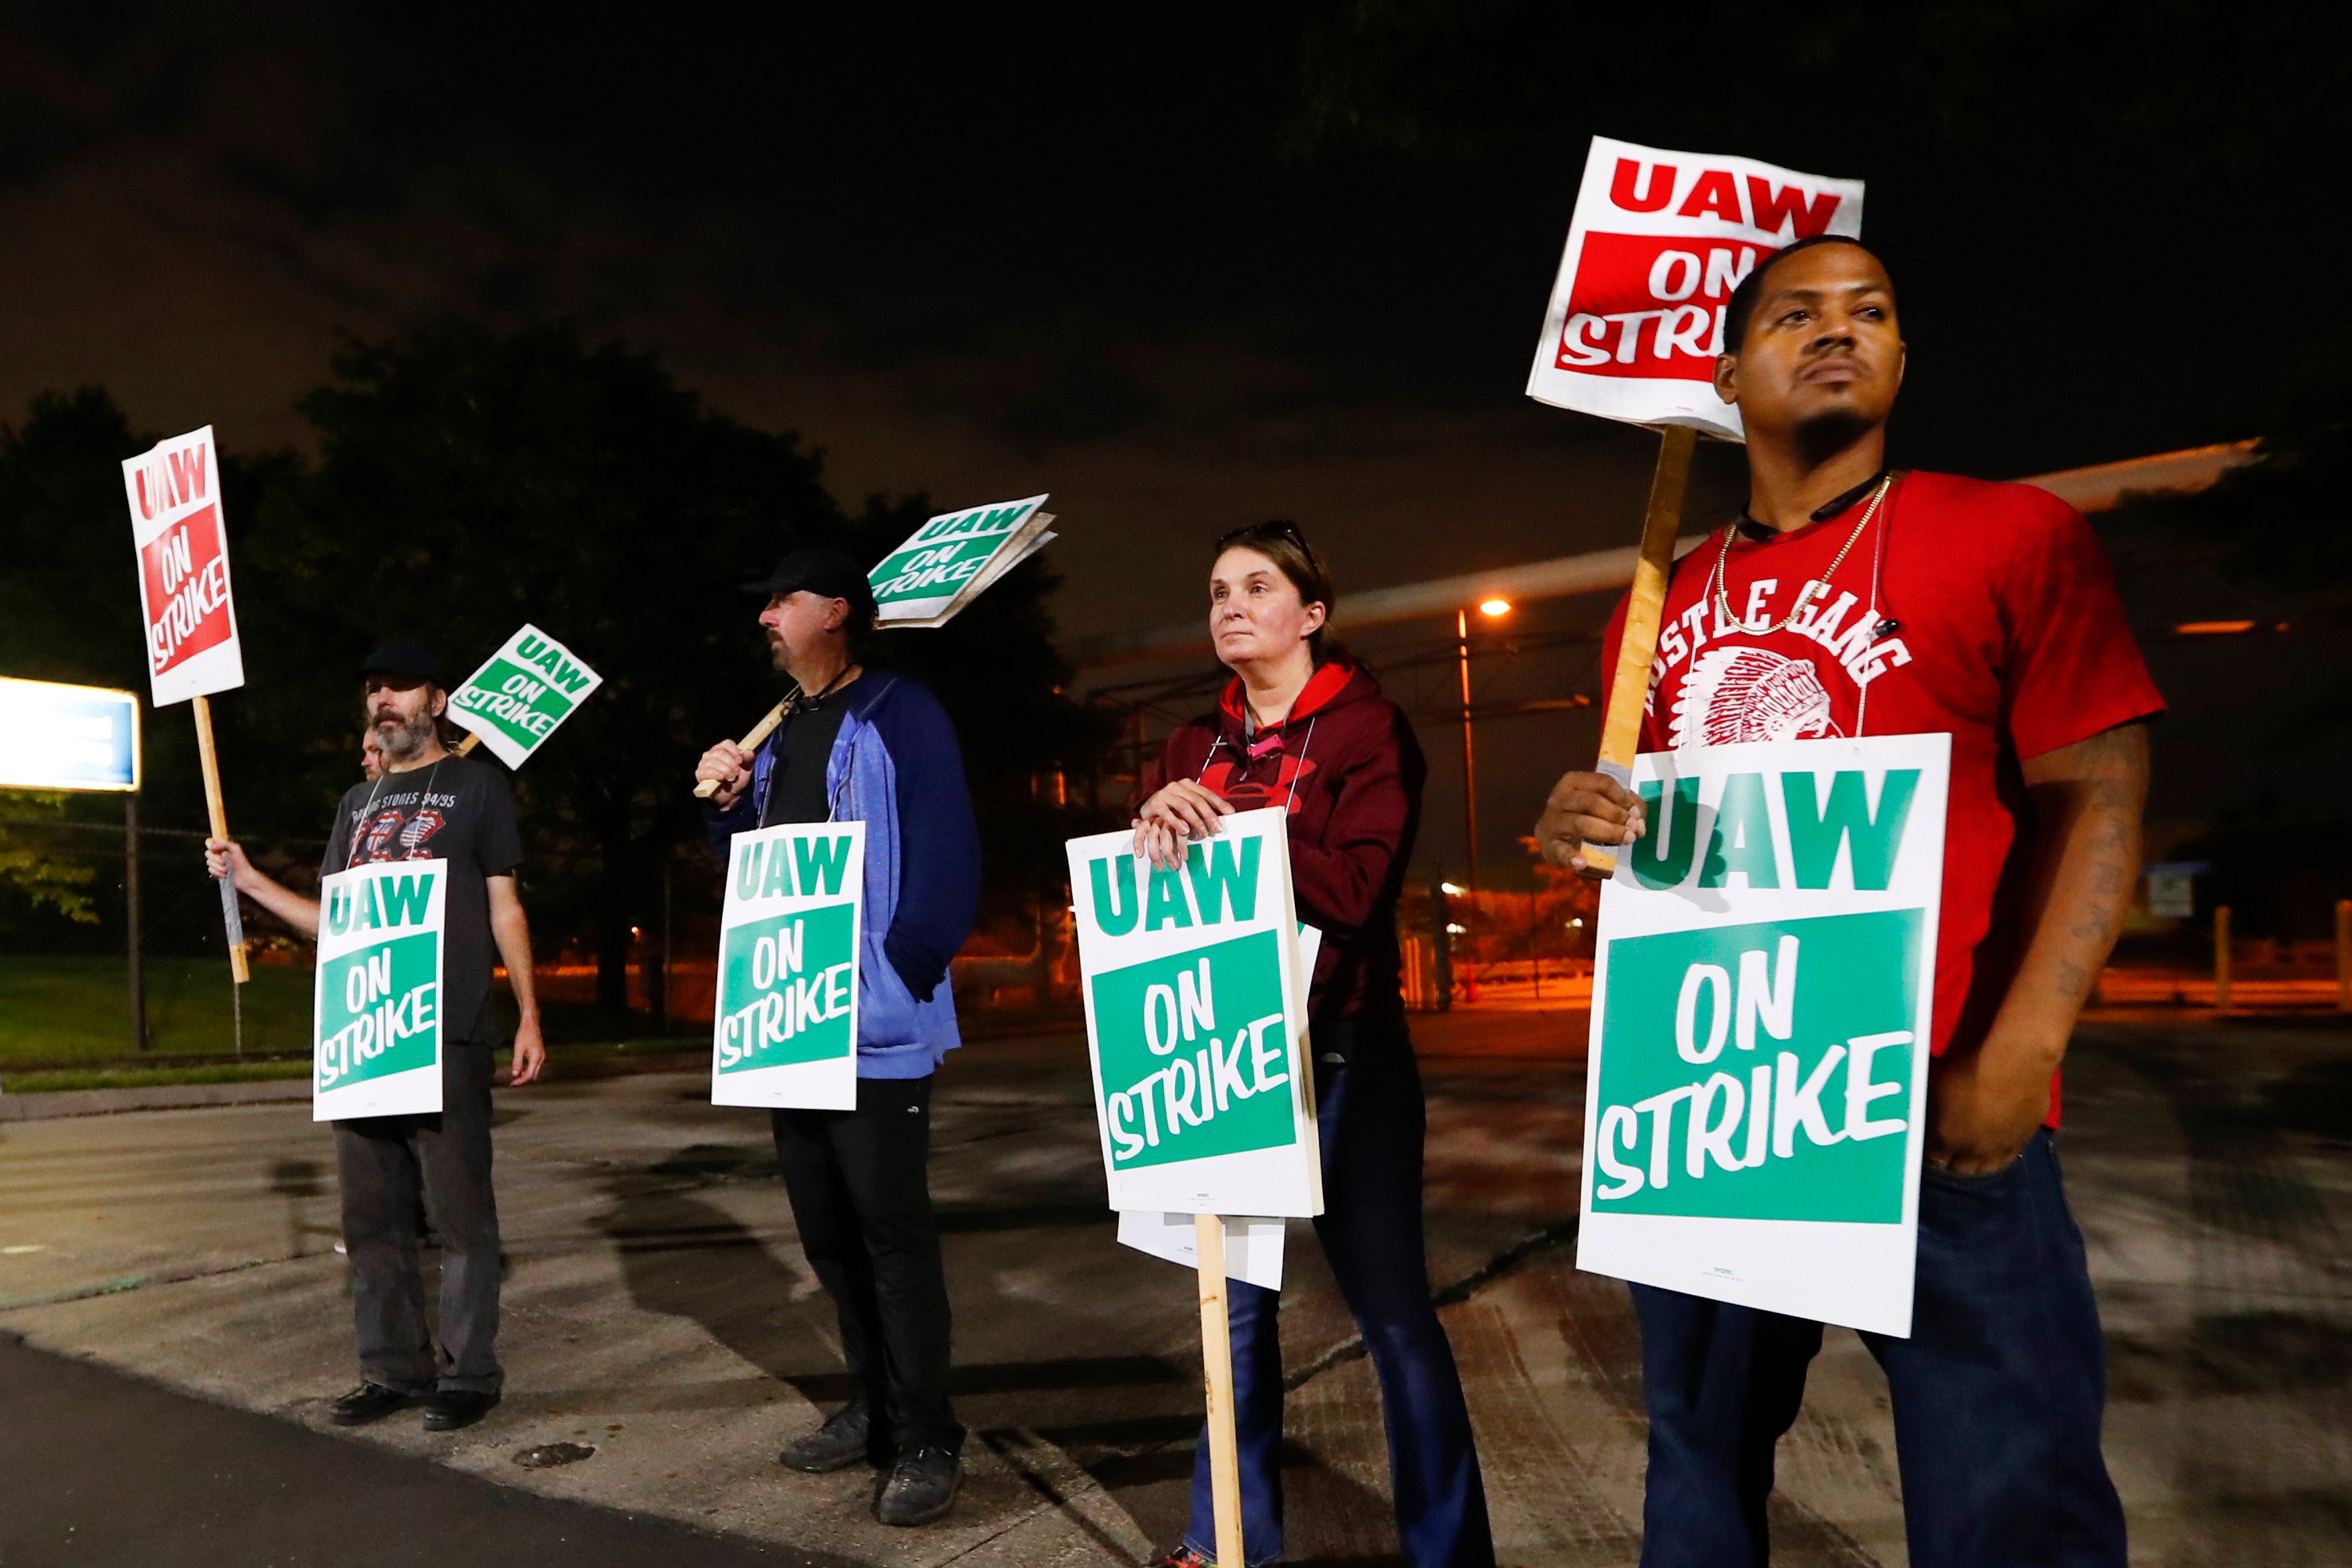 On strike! UAW workers walk out on GM Fox Business